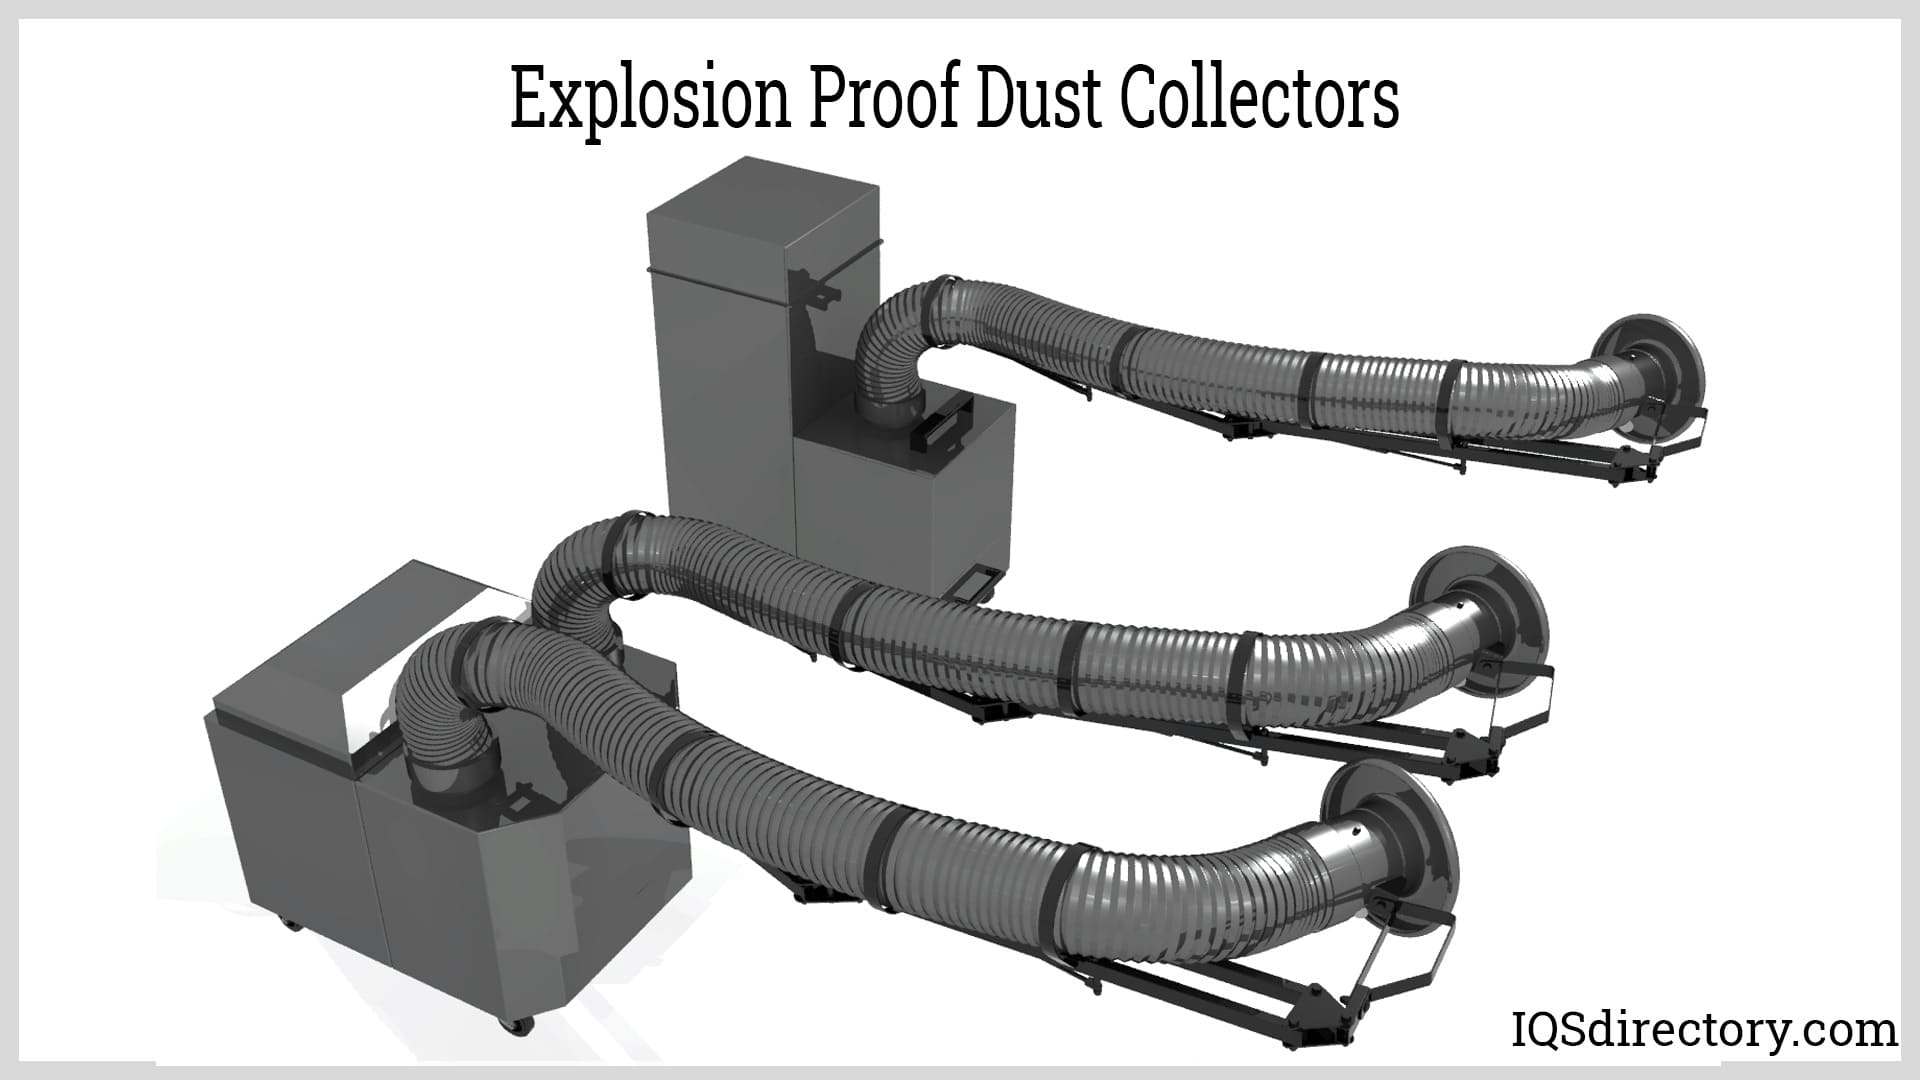 Explosion Proof Dust Collectors